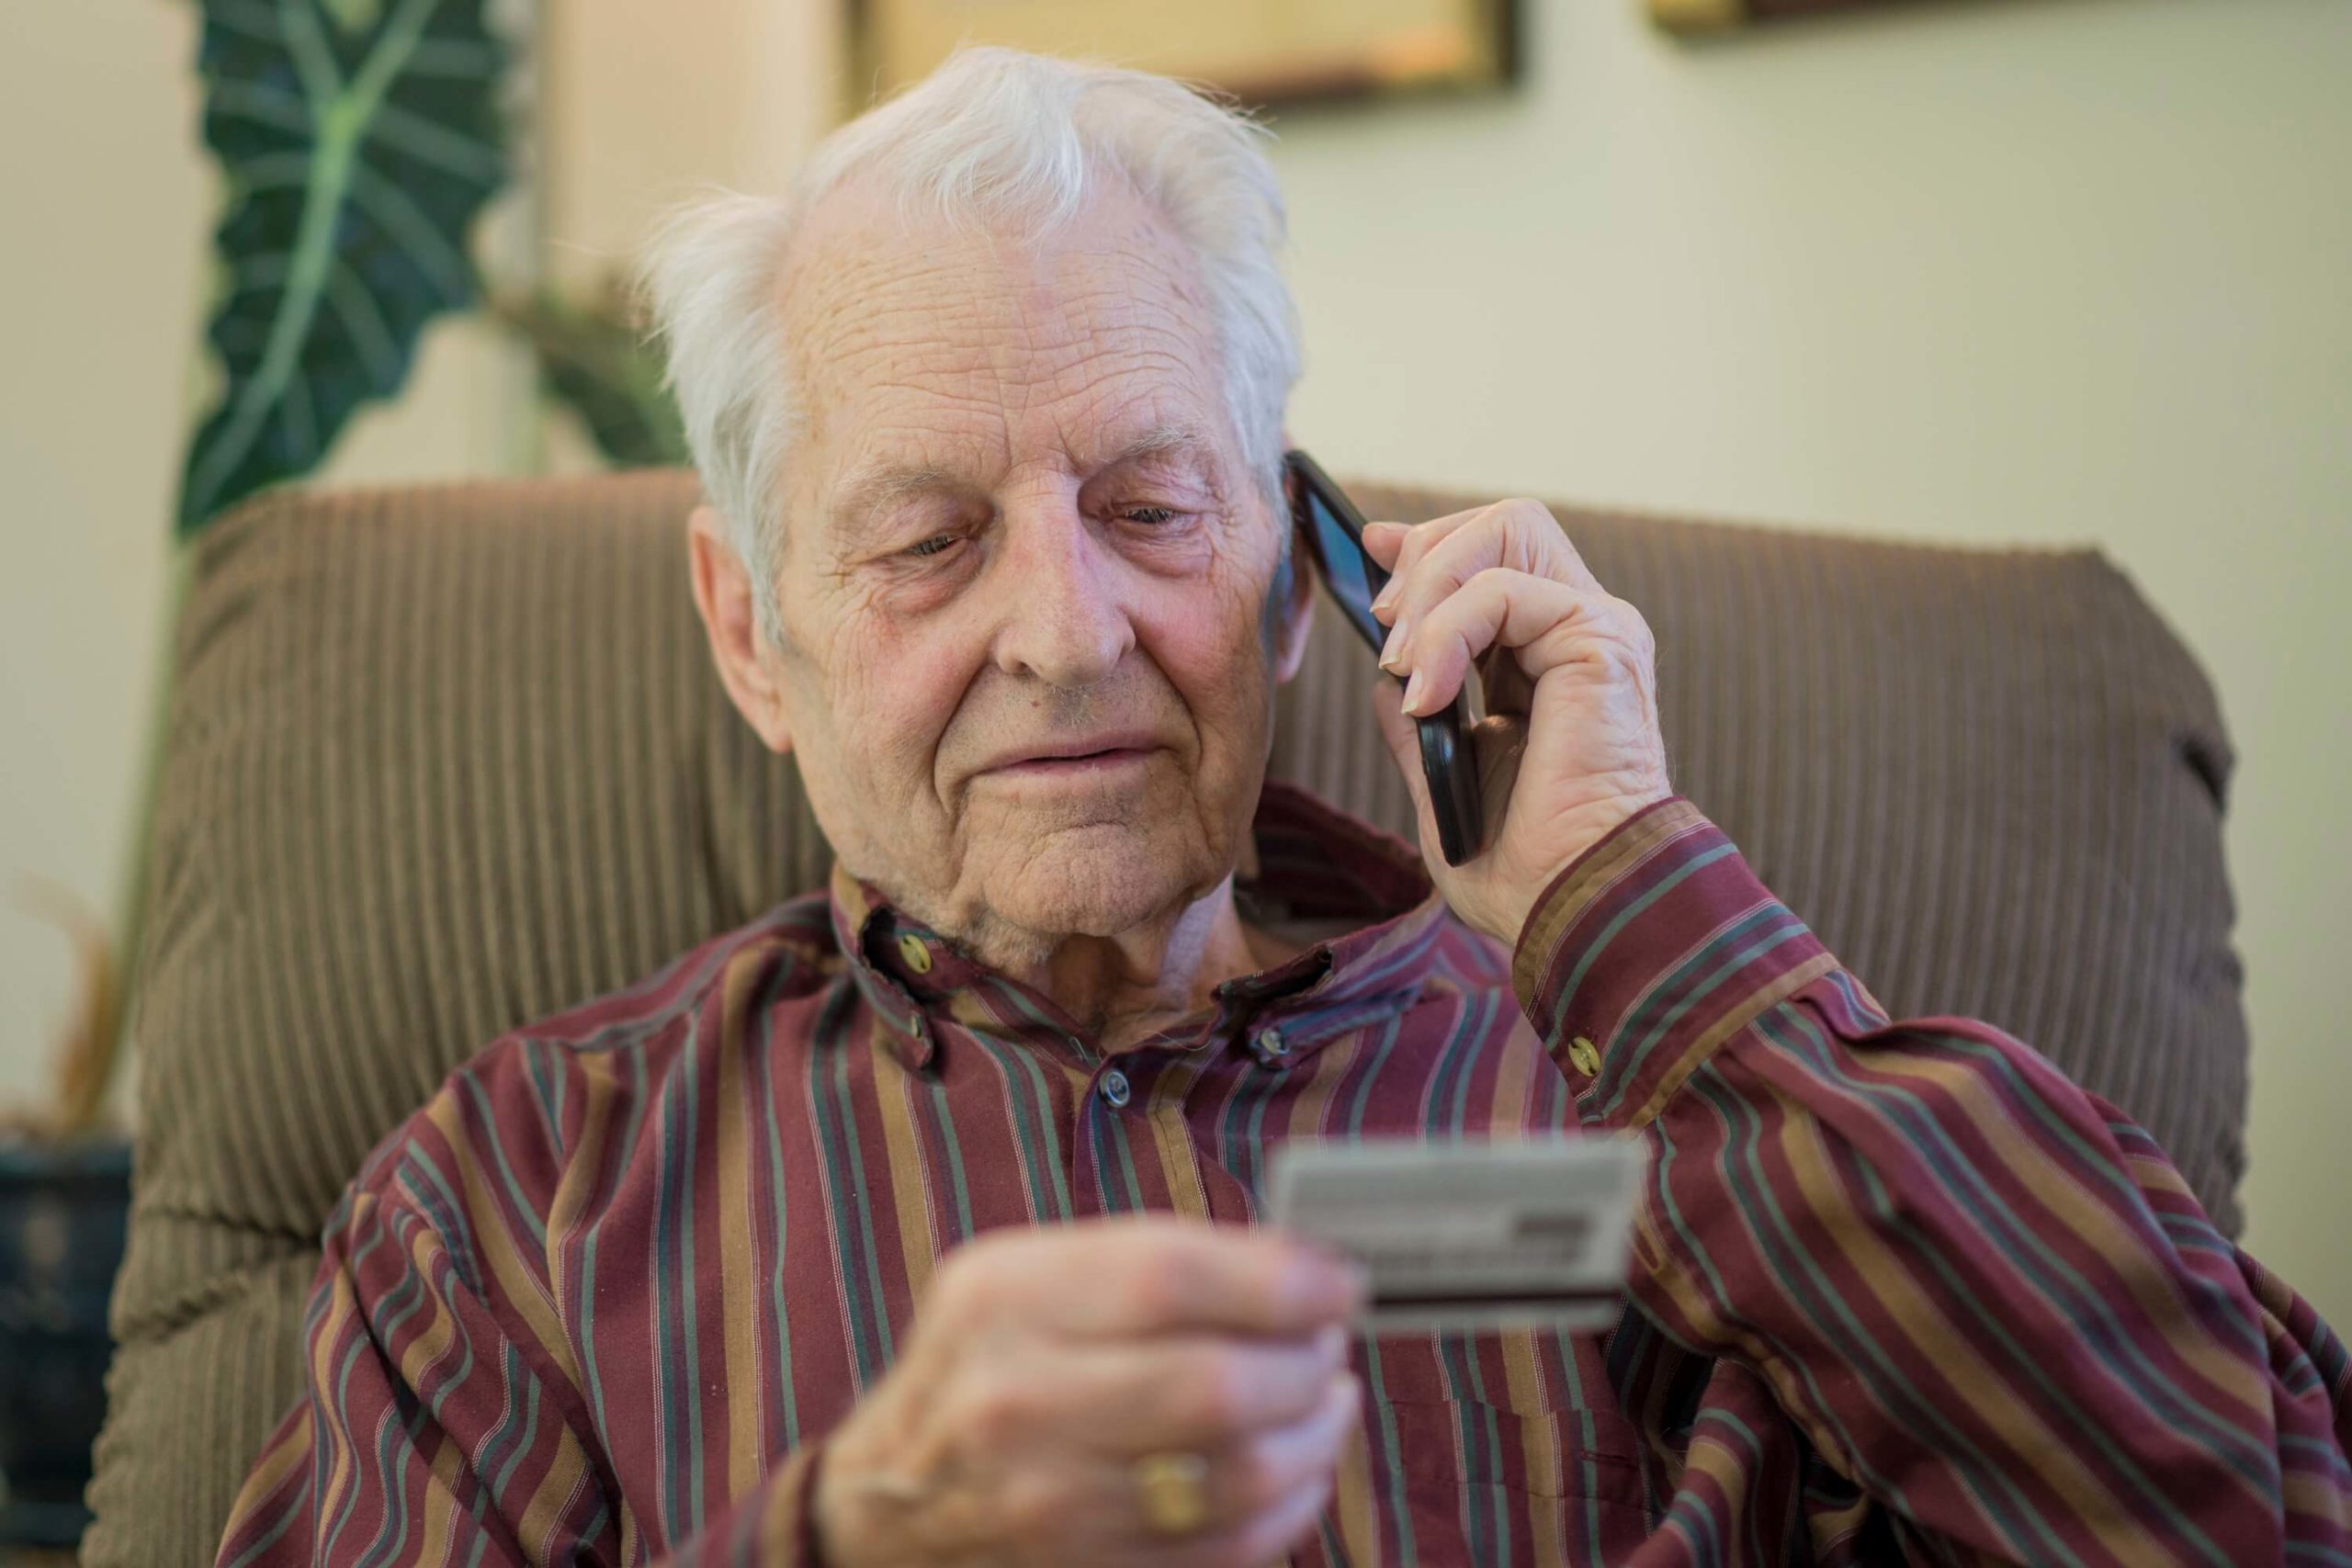 The 5 Most Common Scams Targeting Seniors Today